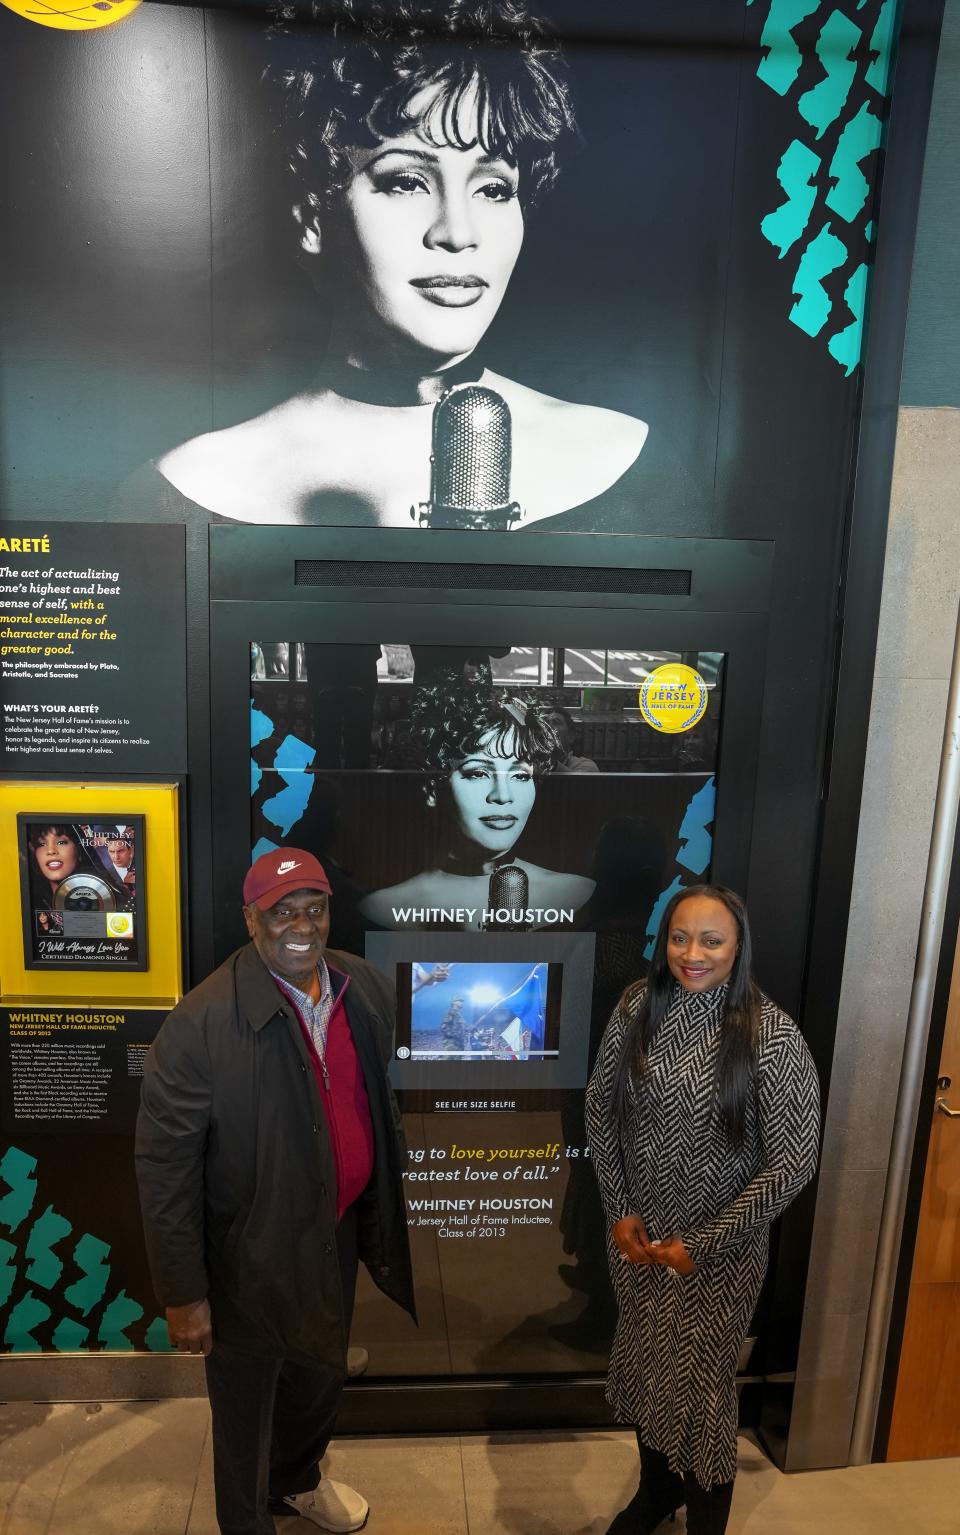 Gary Houston, Whitney Houston’s brother and former NBA basketball player, and Pat Houston, executor of The Estate of Whitney E. Houston, stand in front of the Whitney Houston installation at the Whitney Houston
Garden State Parkway Service Area.